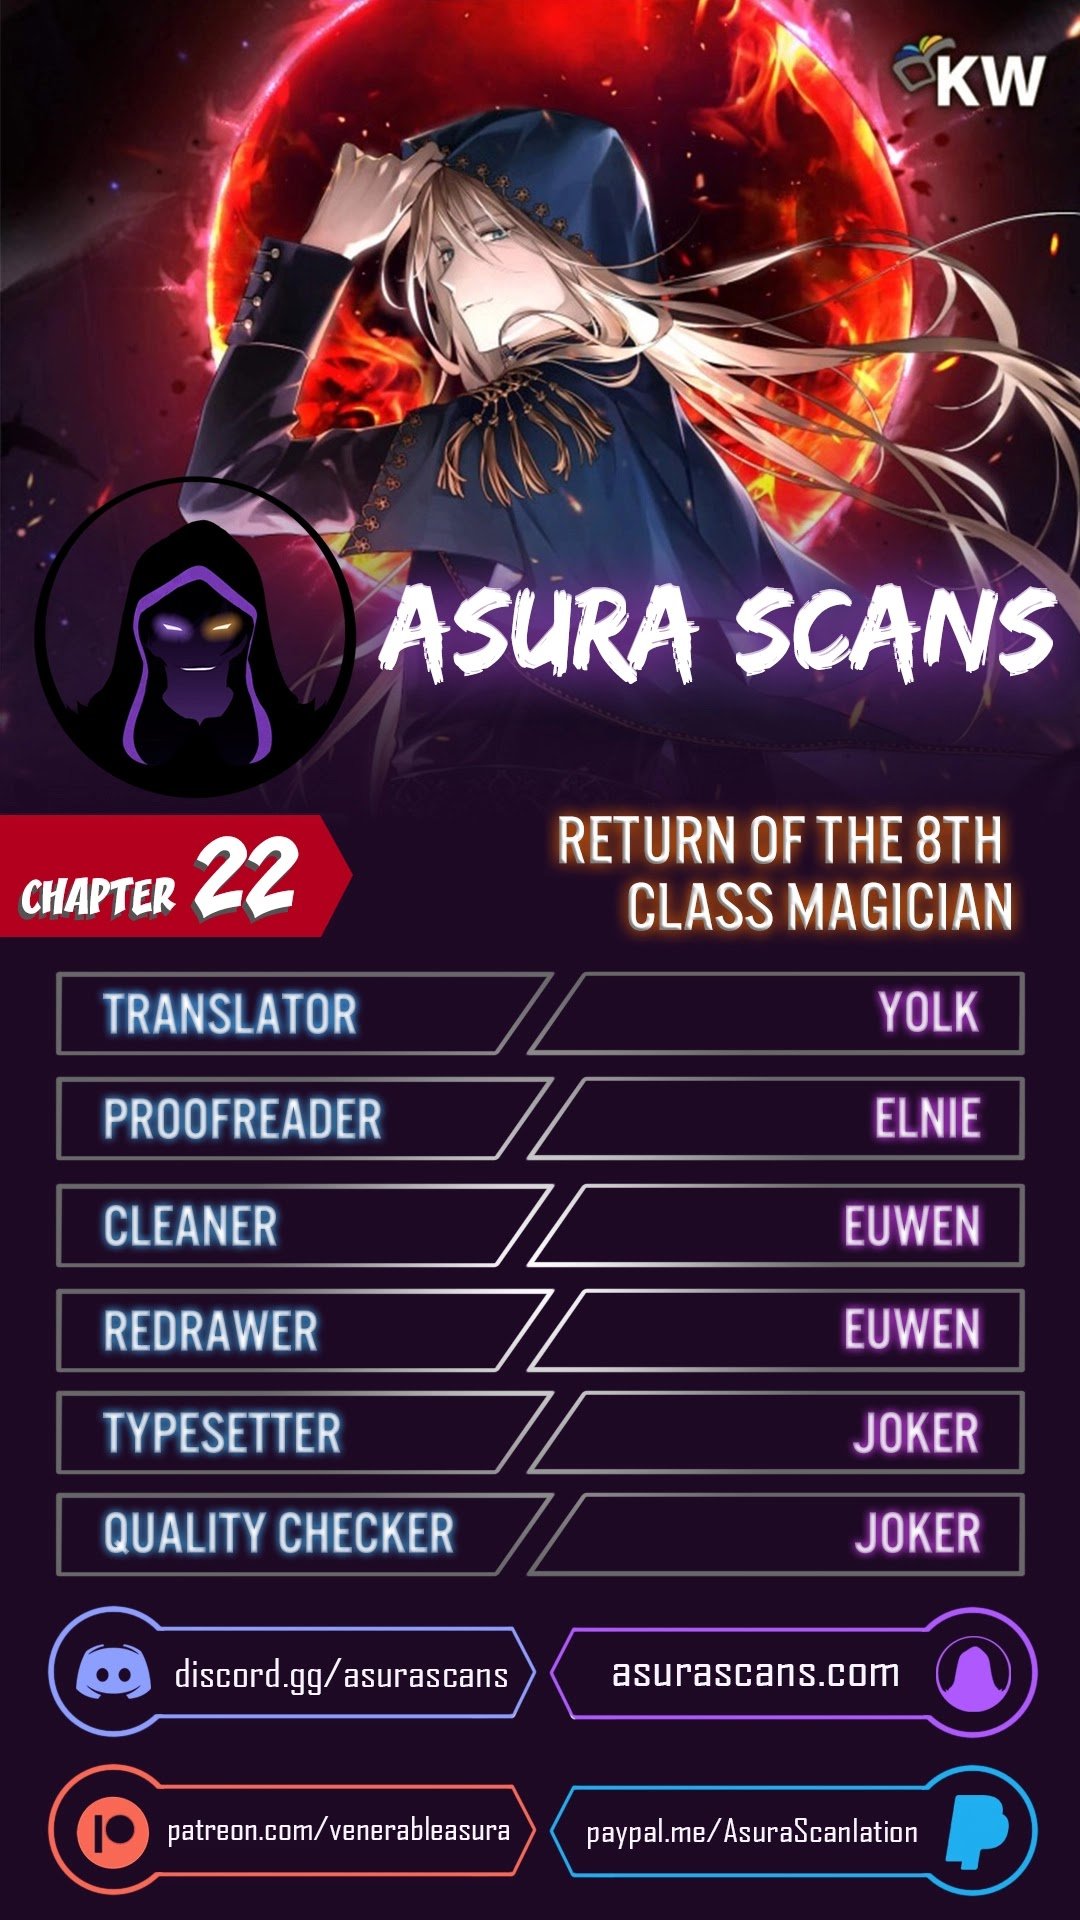 Return of the 8th class Magician chapter 22